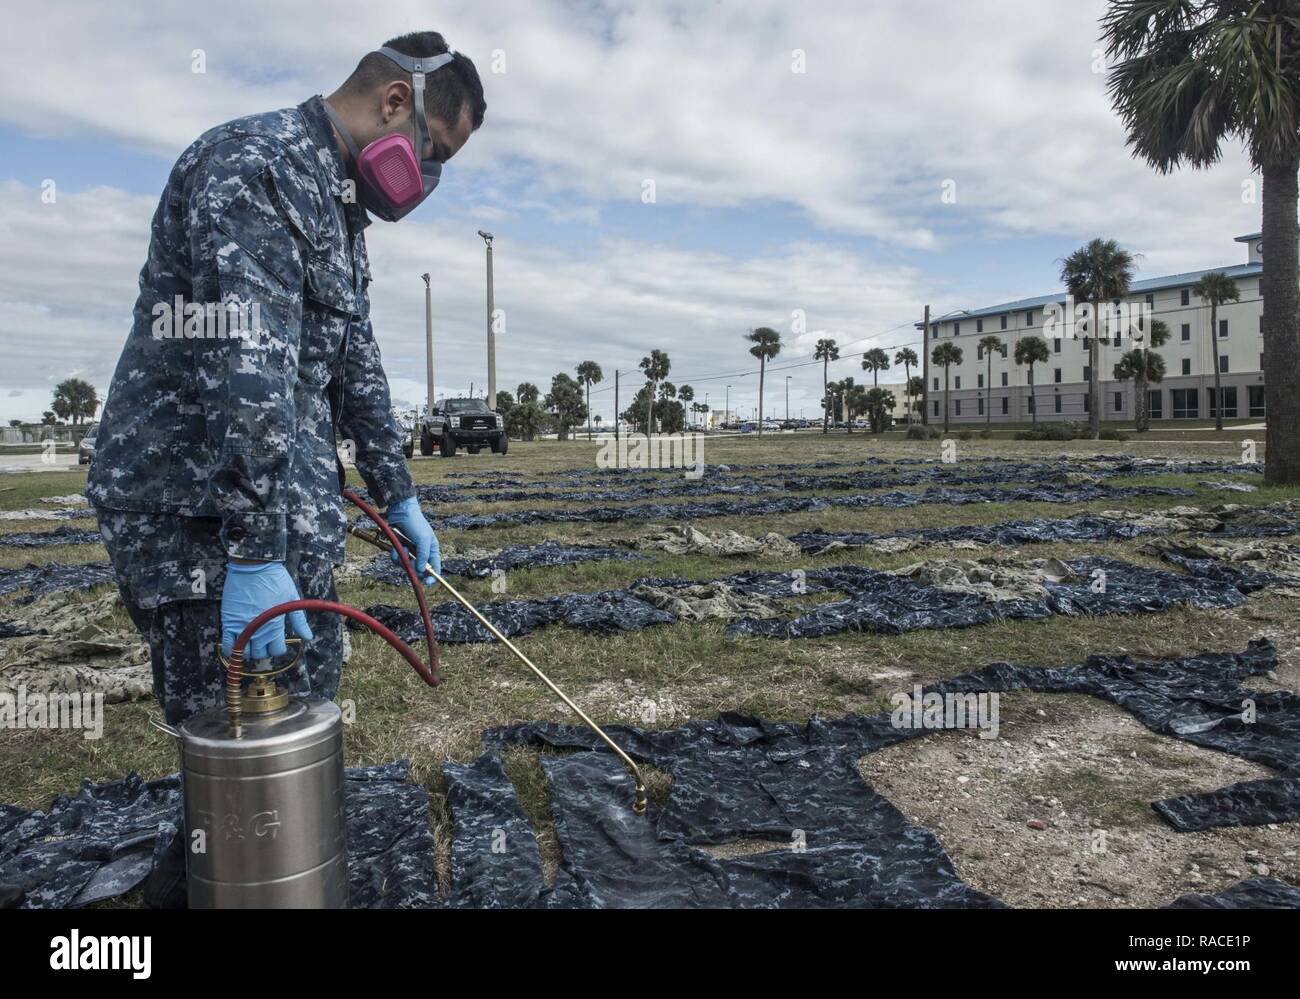 (Jan. 23, 2017) MAYPORT, Fla. - Hospital Corpsman 3rd Class Joshua Nieto of Navy Entomology Center of Excellence (NECE) Jacksonville, Fla.,  applies the insect repellant Permethrin to uniforms at Naval Station Mayport, Fla. Treating uniforms is one of many preparations  service members are taking before departing on Continuing Promise 2017 (CP-17). Continuing Promise 2017 is a U.S. Southern Command-sponsored and U.S. Naval Forces Southern Command/U.S. 4th Fleet-conducted deployment to conduct civil-military operations including humanitarian assistance, training engagements, and medical, dental Stock Photo